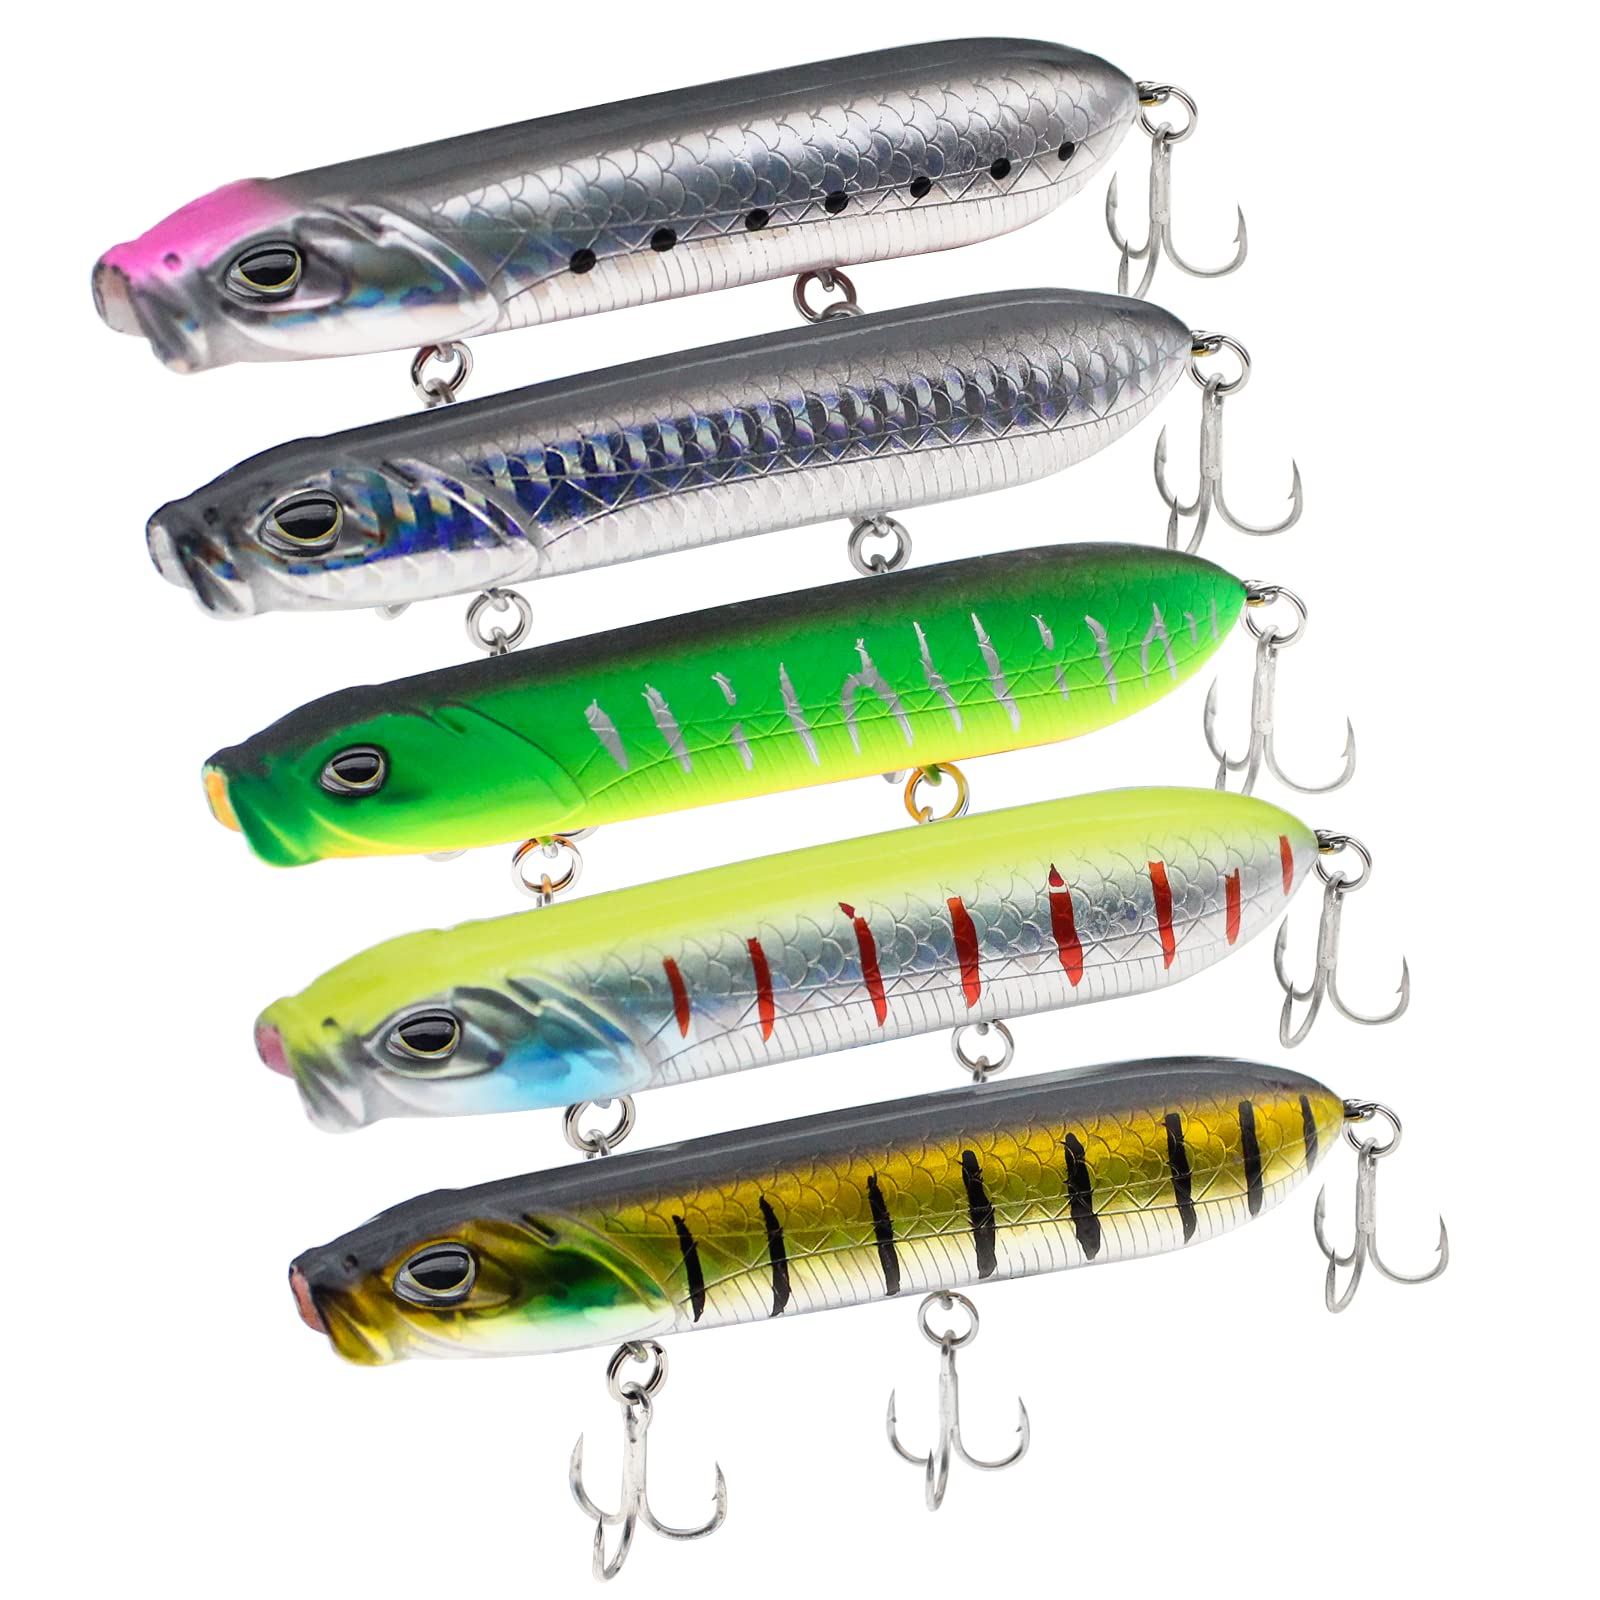 10pcs Fishing Lures Fishing Baits Bass Freshwater Baits Striped Bass  Explosive Hook To Rotate Hard, Bait Traps -  Canada